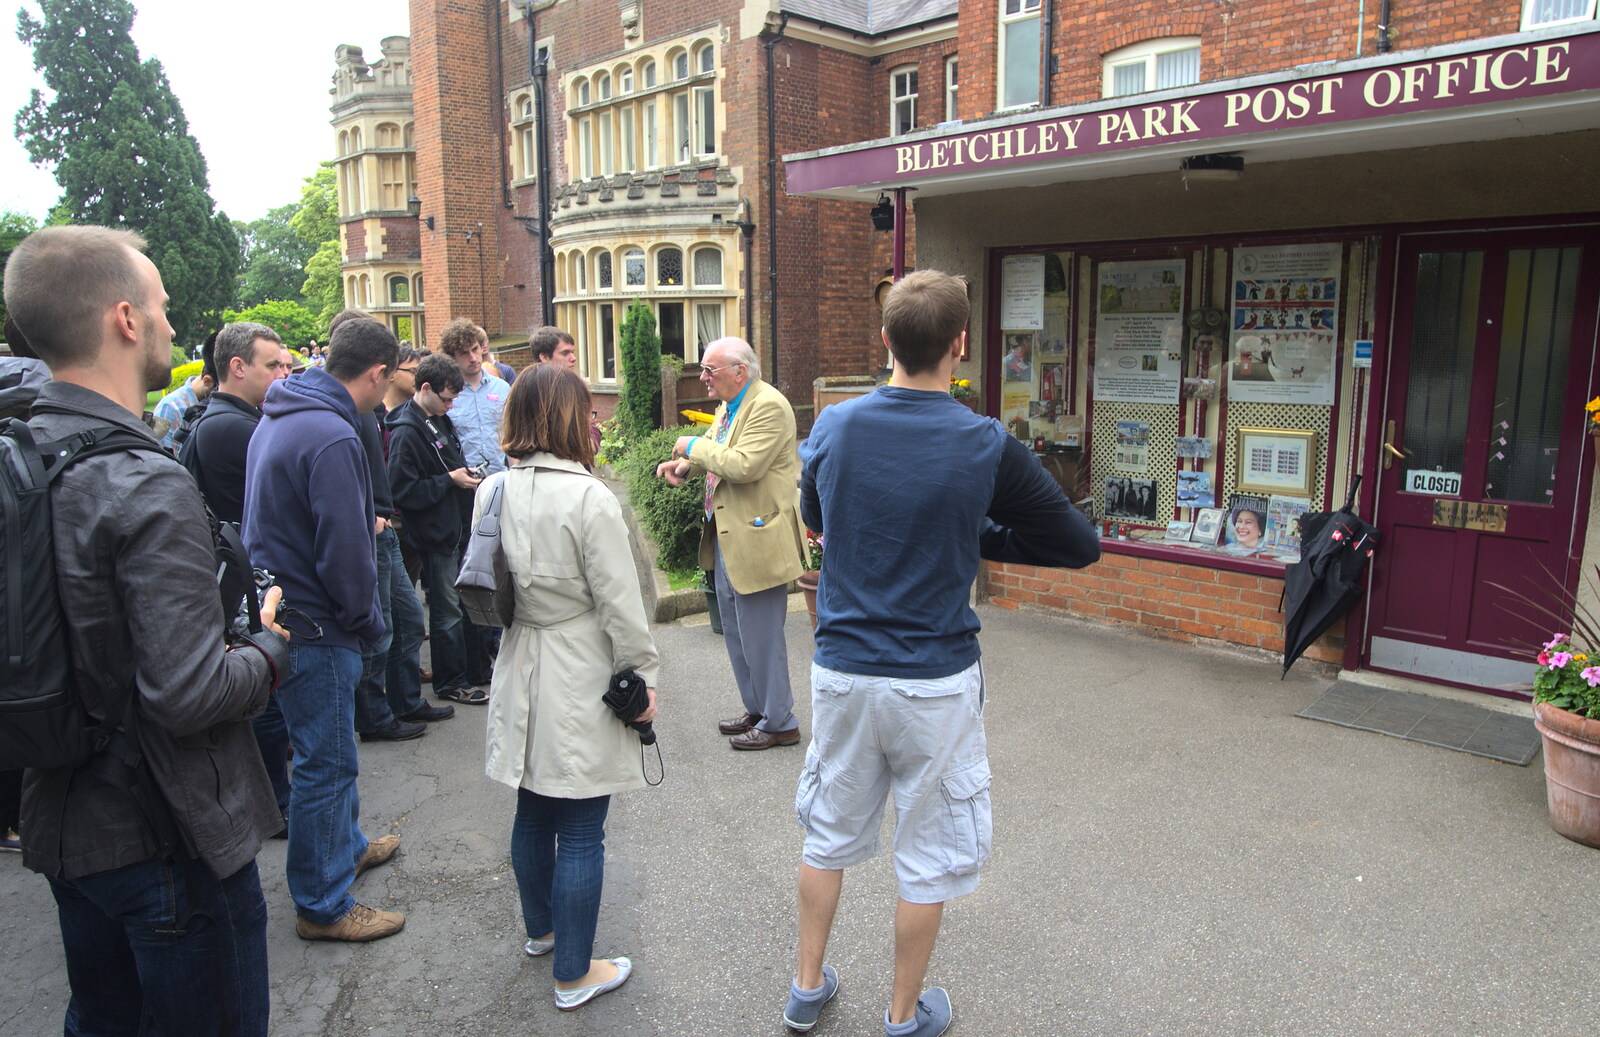 There's an intro talk by the Post Office from TouchType does Bletchley Park, Bletchley, Bedfordshire - 20th July 2012